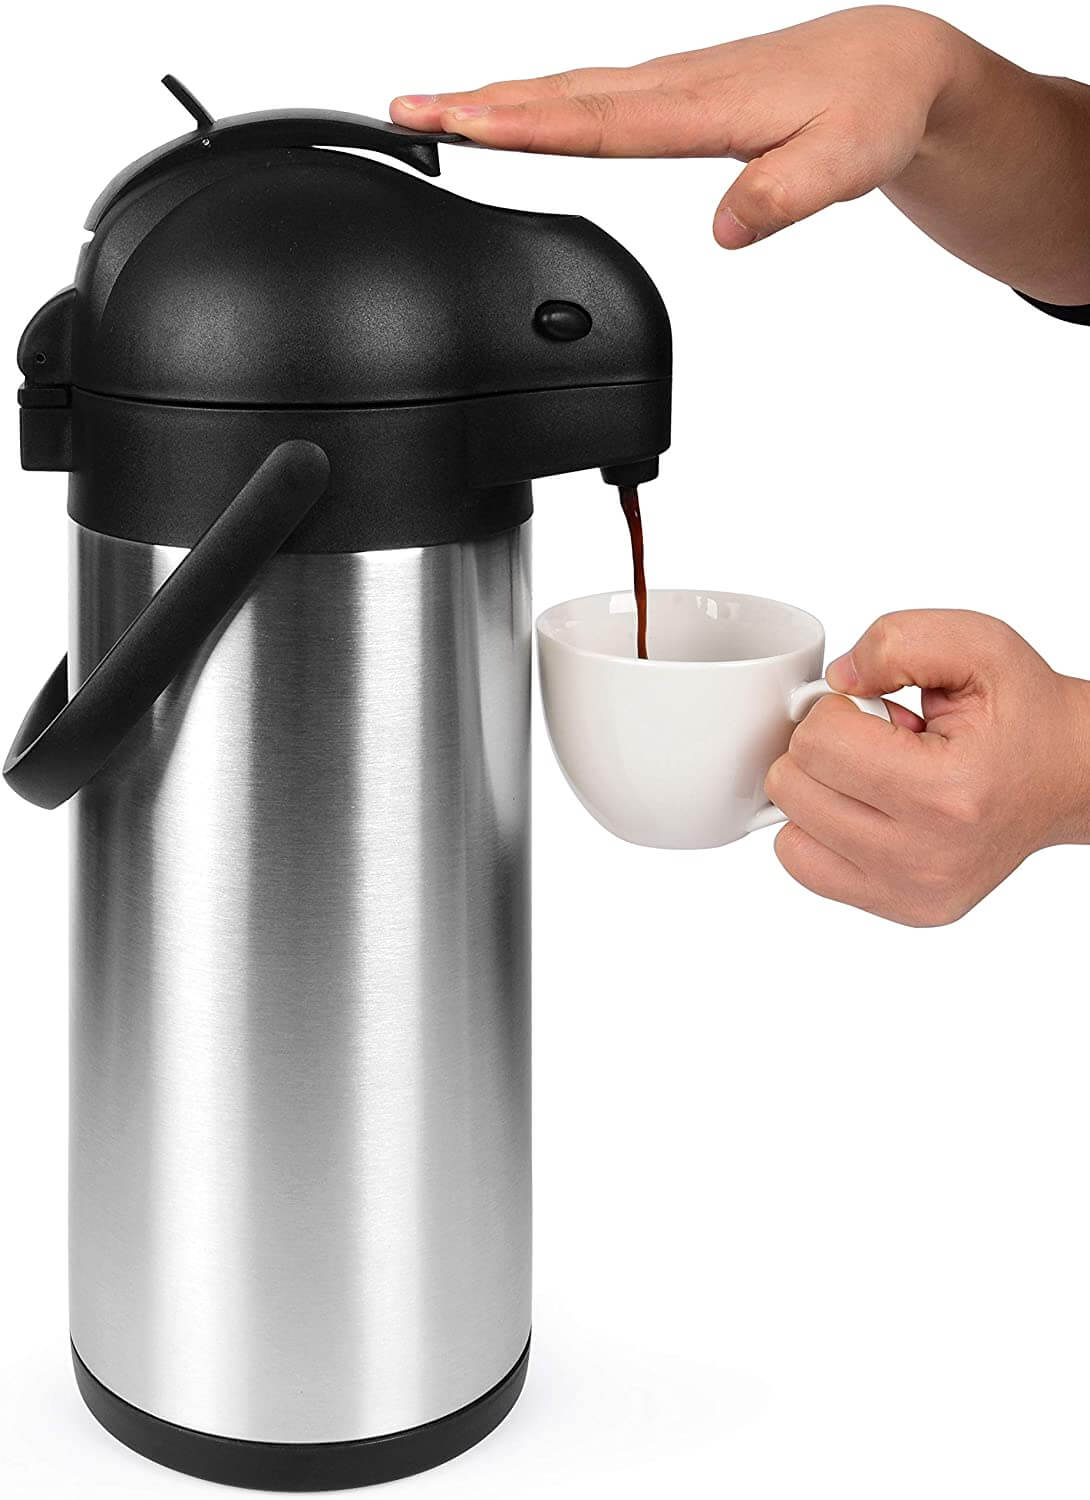 Airpot Coffee Carafe Dispenser Thermal by Pykal